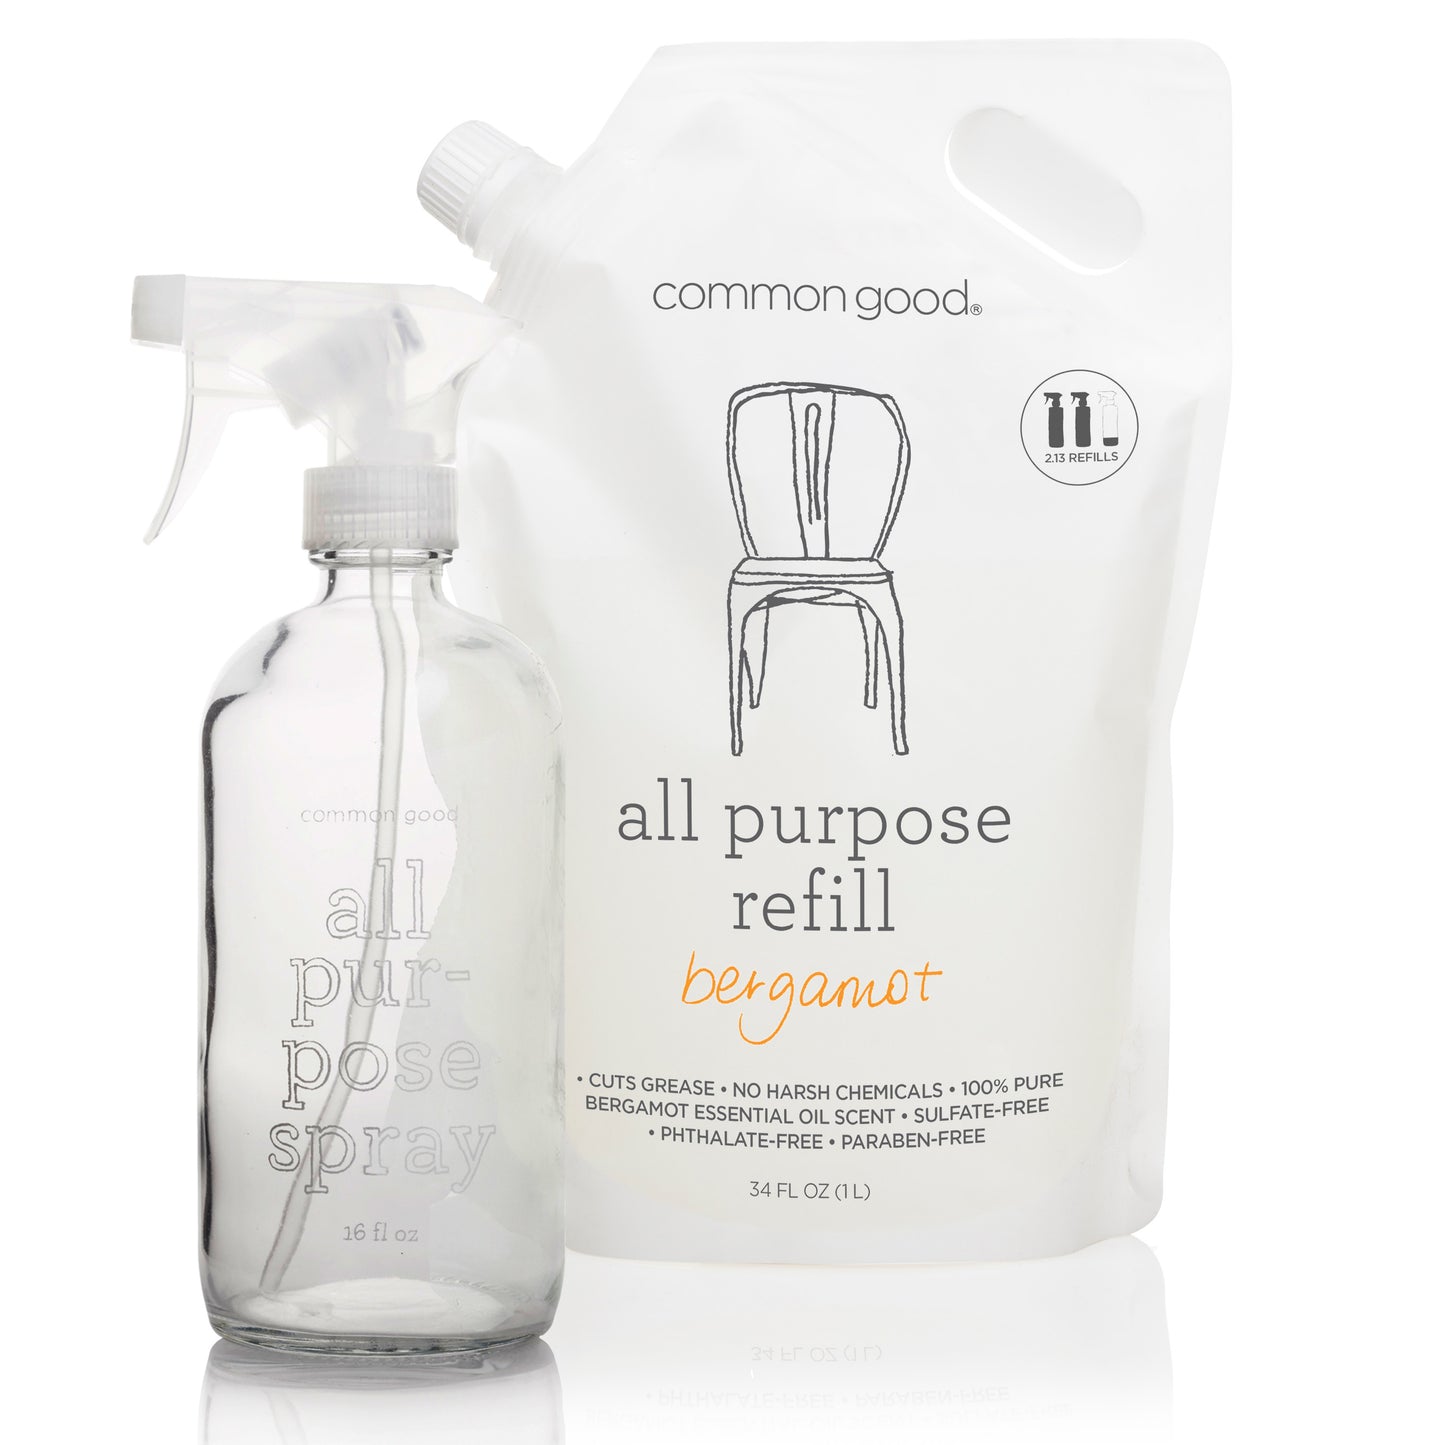 All Purpose Cleaner Refill Pouch and Glass Bottle Set